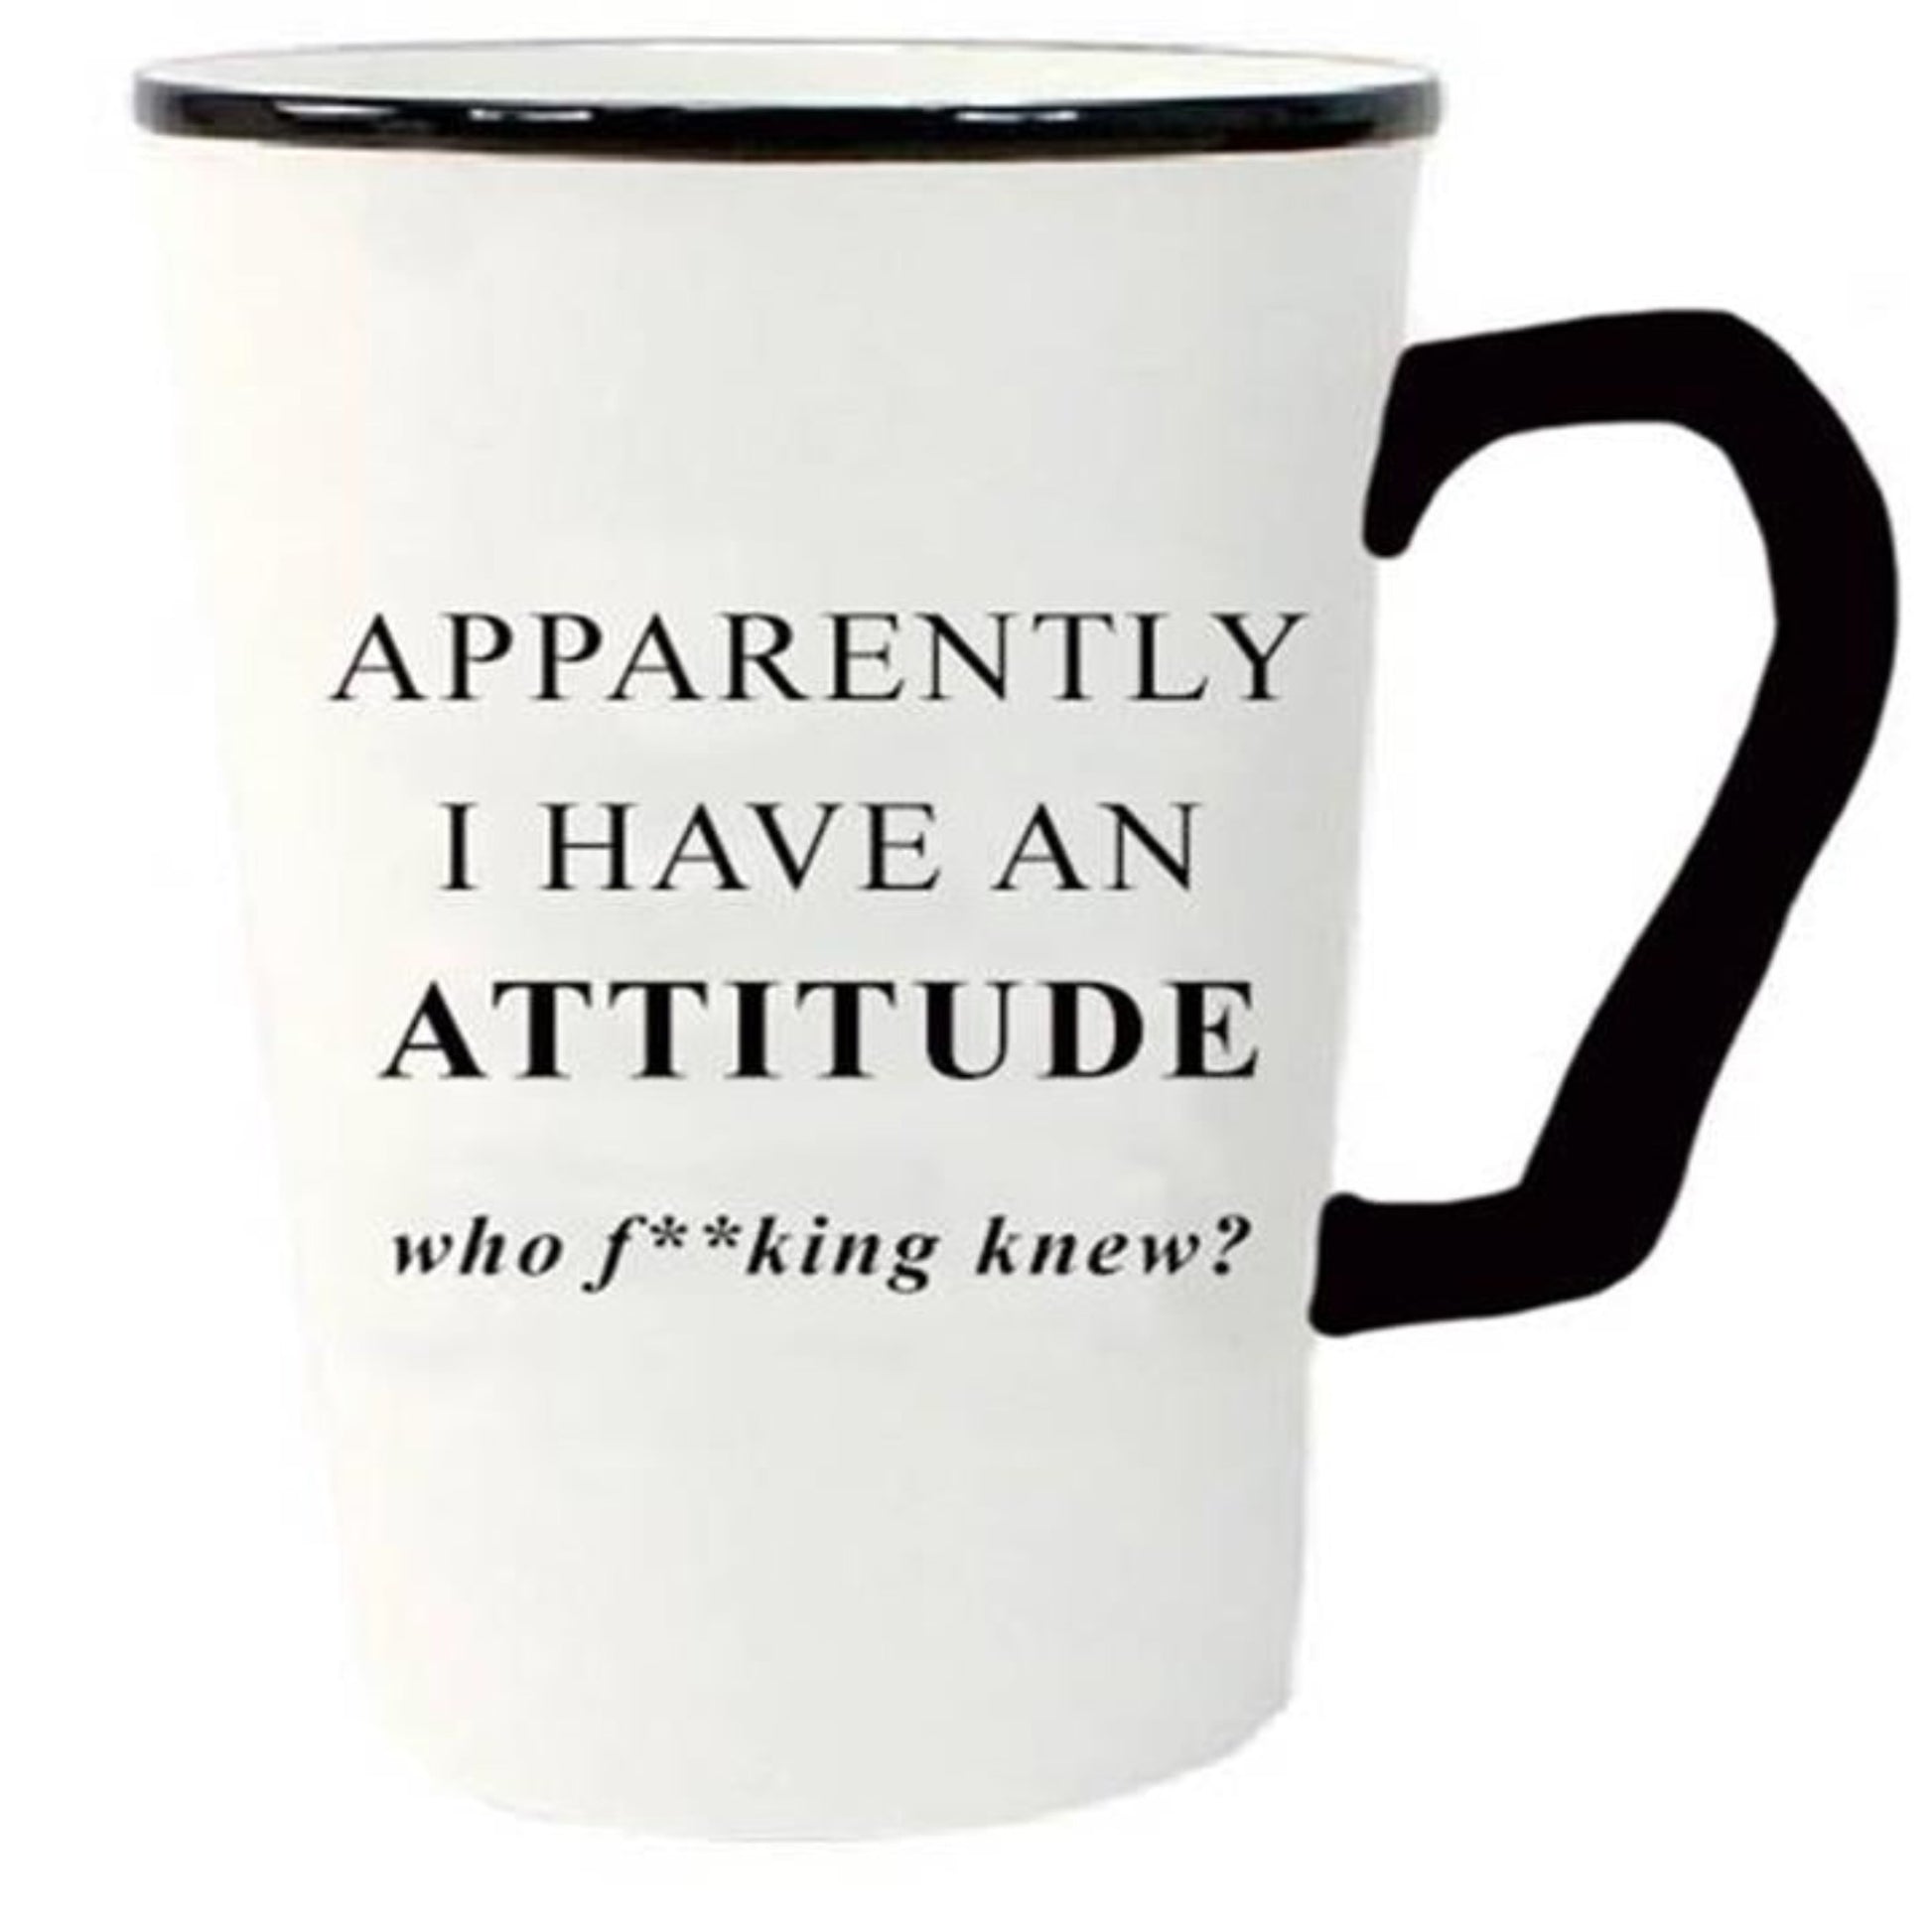 White mug with black handle and rim.  Black typography “Apparently I Have an Attitude, who f**king knew?”